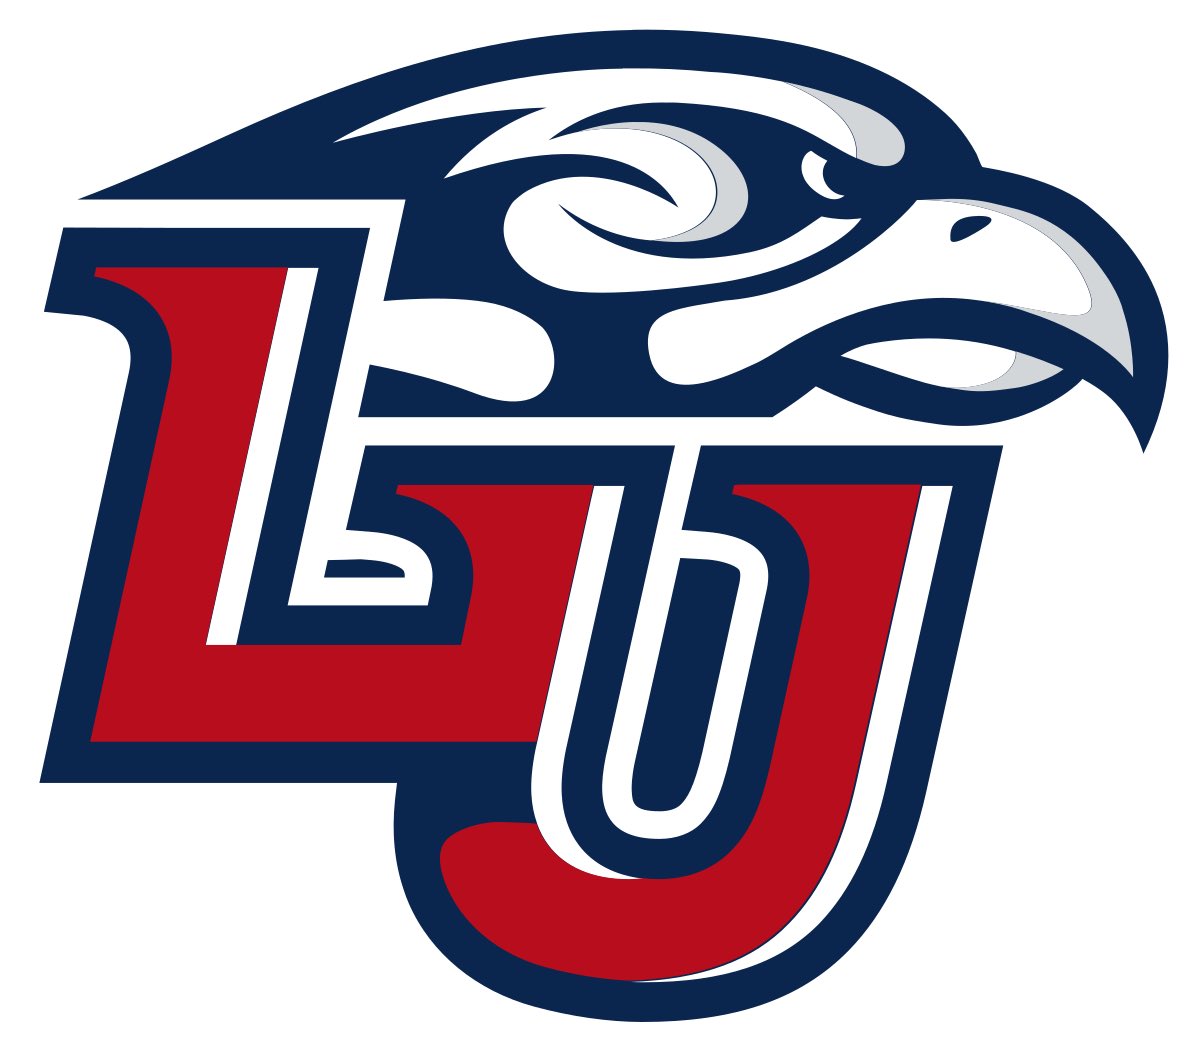 After a great conversation with @MageeCoach, I’m blessed and honored to announce I have received an offer from Liberty! @LUFBRecruiting @LibertyFootball @T_Money4699 @andrejones1185 @BrianDohn247 @MohrRecruiting @WillVapreps @StoneBridgeFB